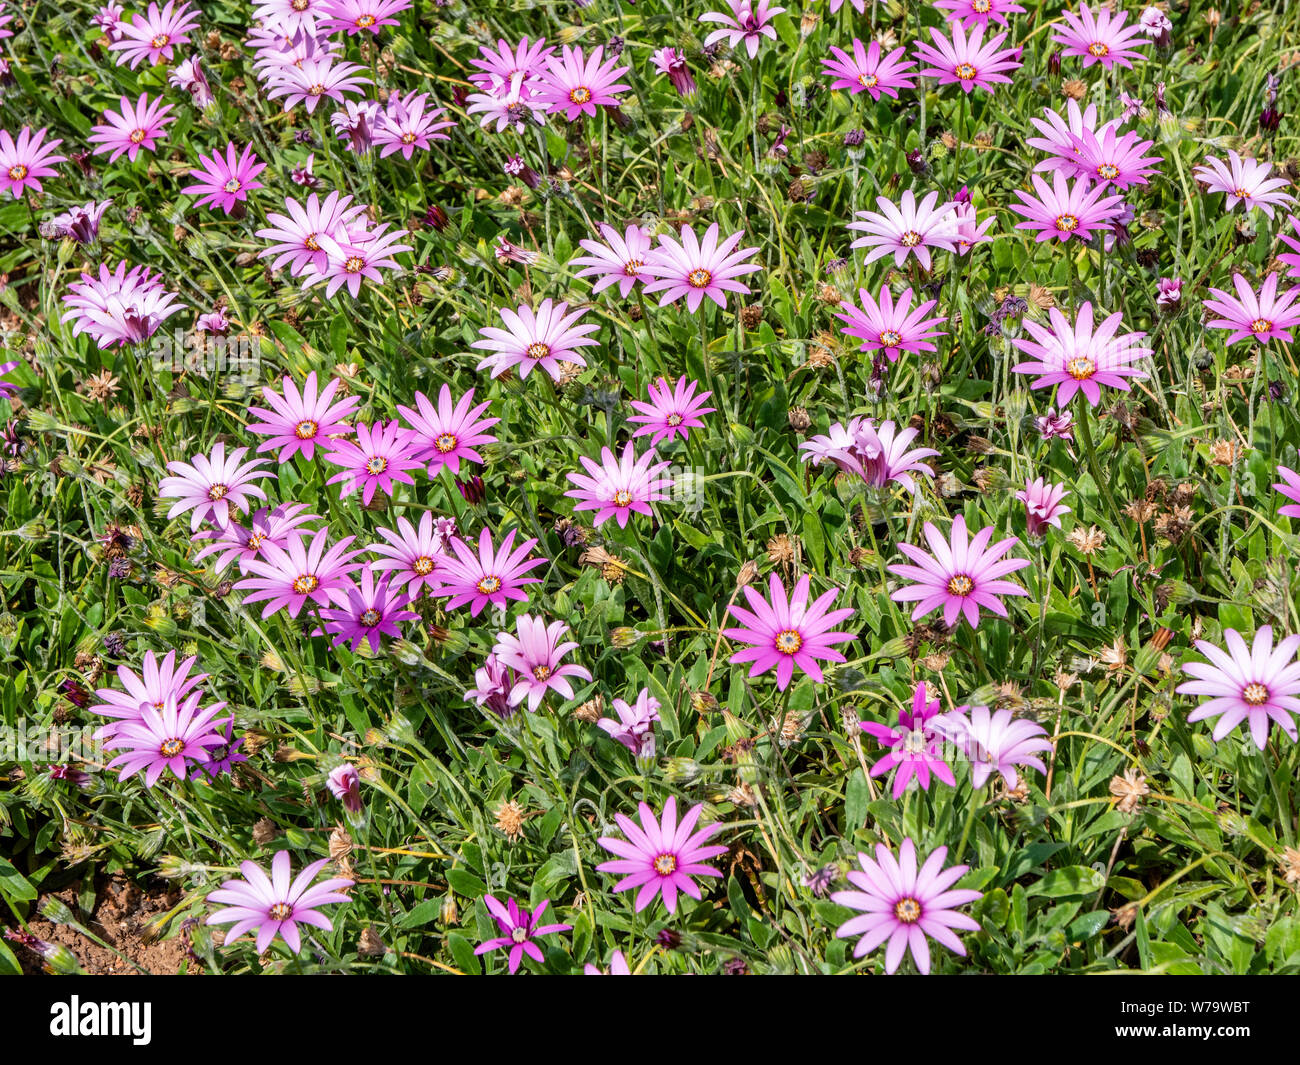 Pink variety of osteospermum the African or Cape daisy used as ground cover in a sunny garden border - England UK Stock Photo